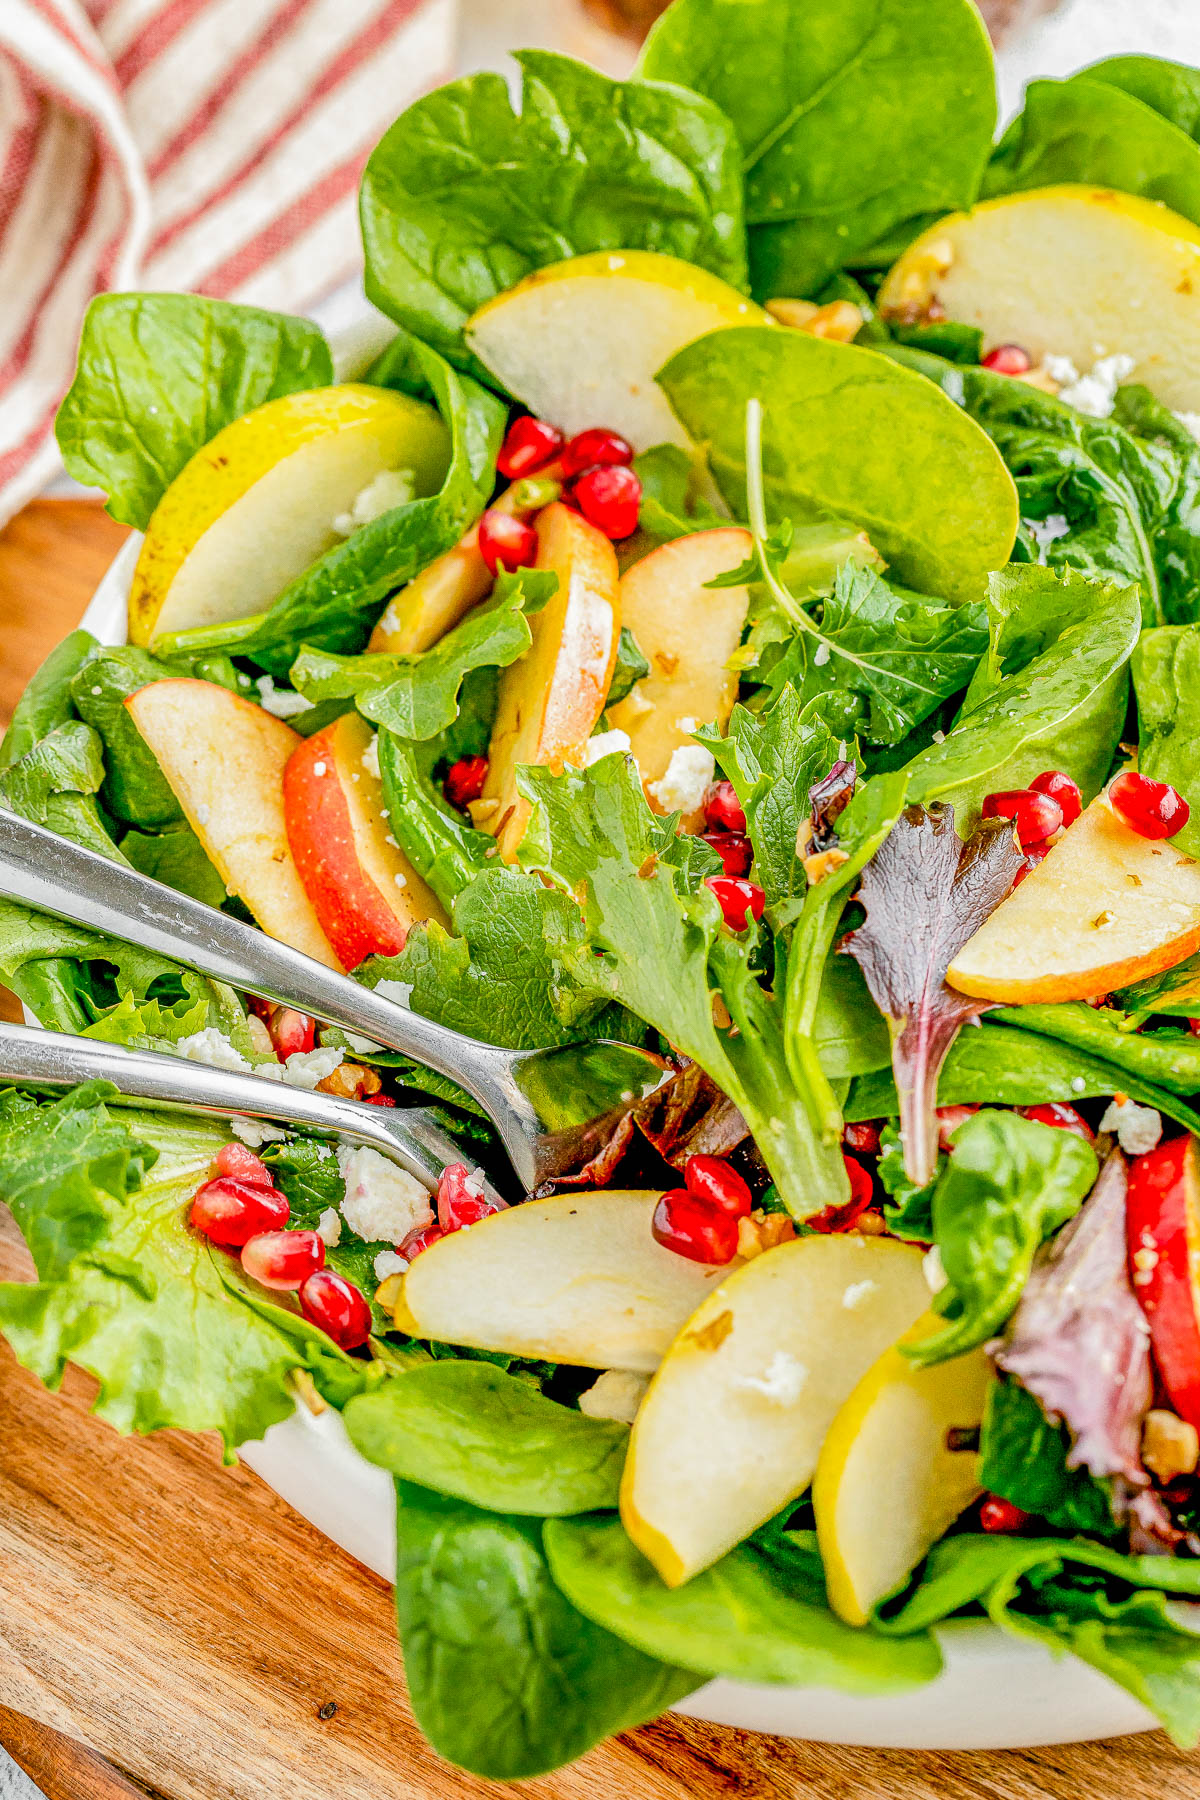 Apple and Pear Salad with Balsamic Vinaigrette - Complete with crisp apples, tender juicy pears, pomegranate seeds, nuts, crumbled feta, and a tangy homemade honey maple balsamic vinaigrette! Whether you're looking for a quick lunch idea, dinner side, or a holiday side dish for Thanksgiving or Christmas, this FAST and EASY salad is sure to get rave reviews!